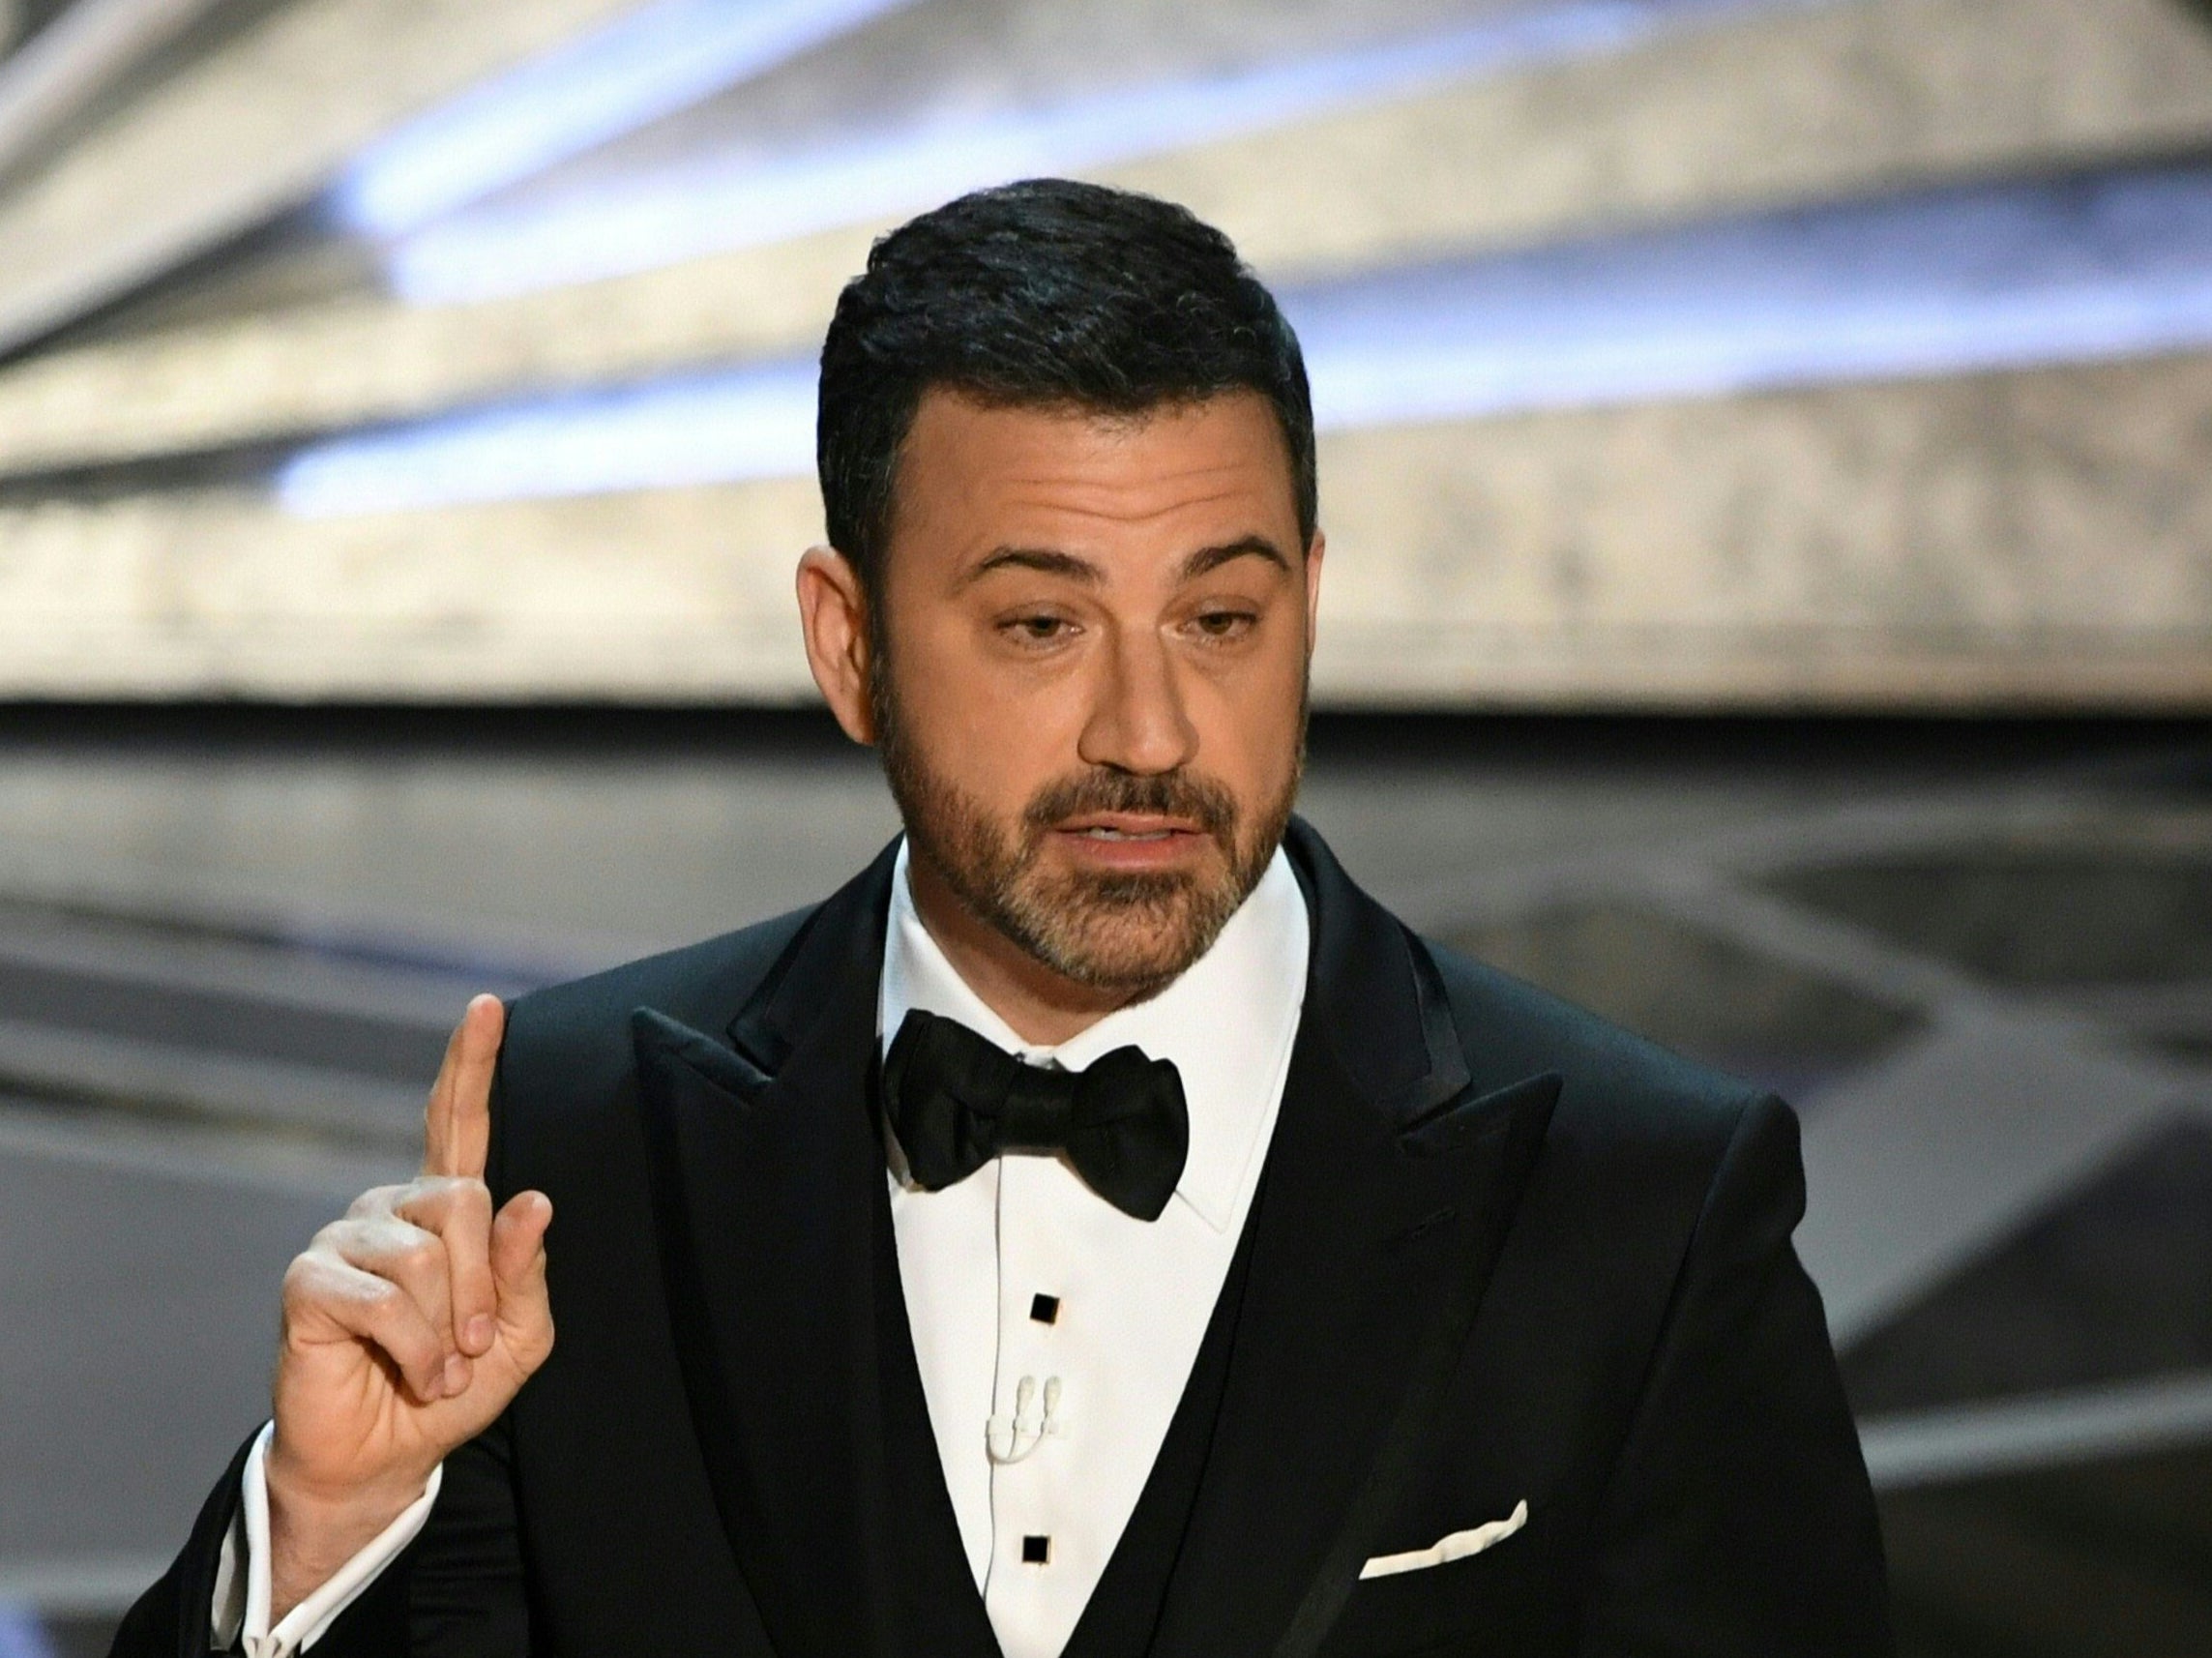 The Oscars host may be a thing of the past – good